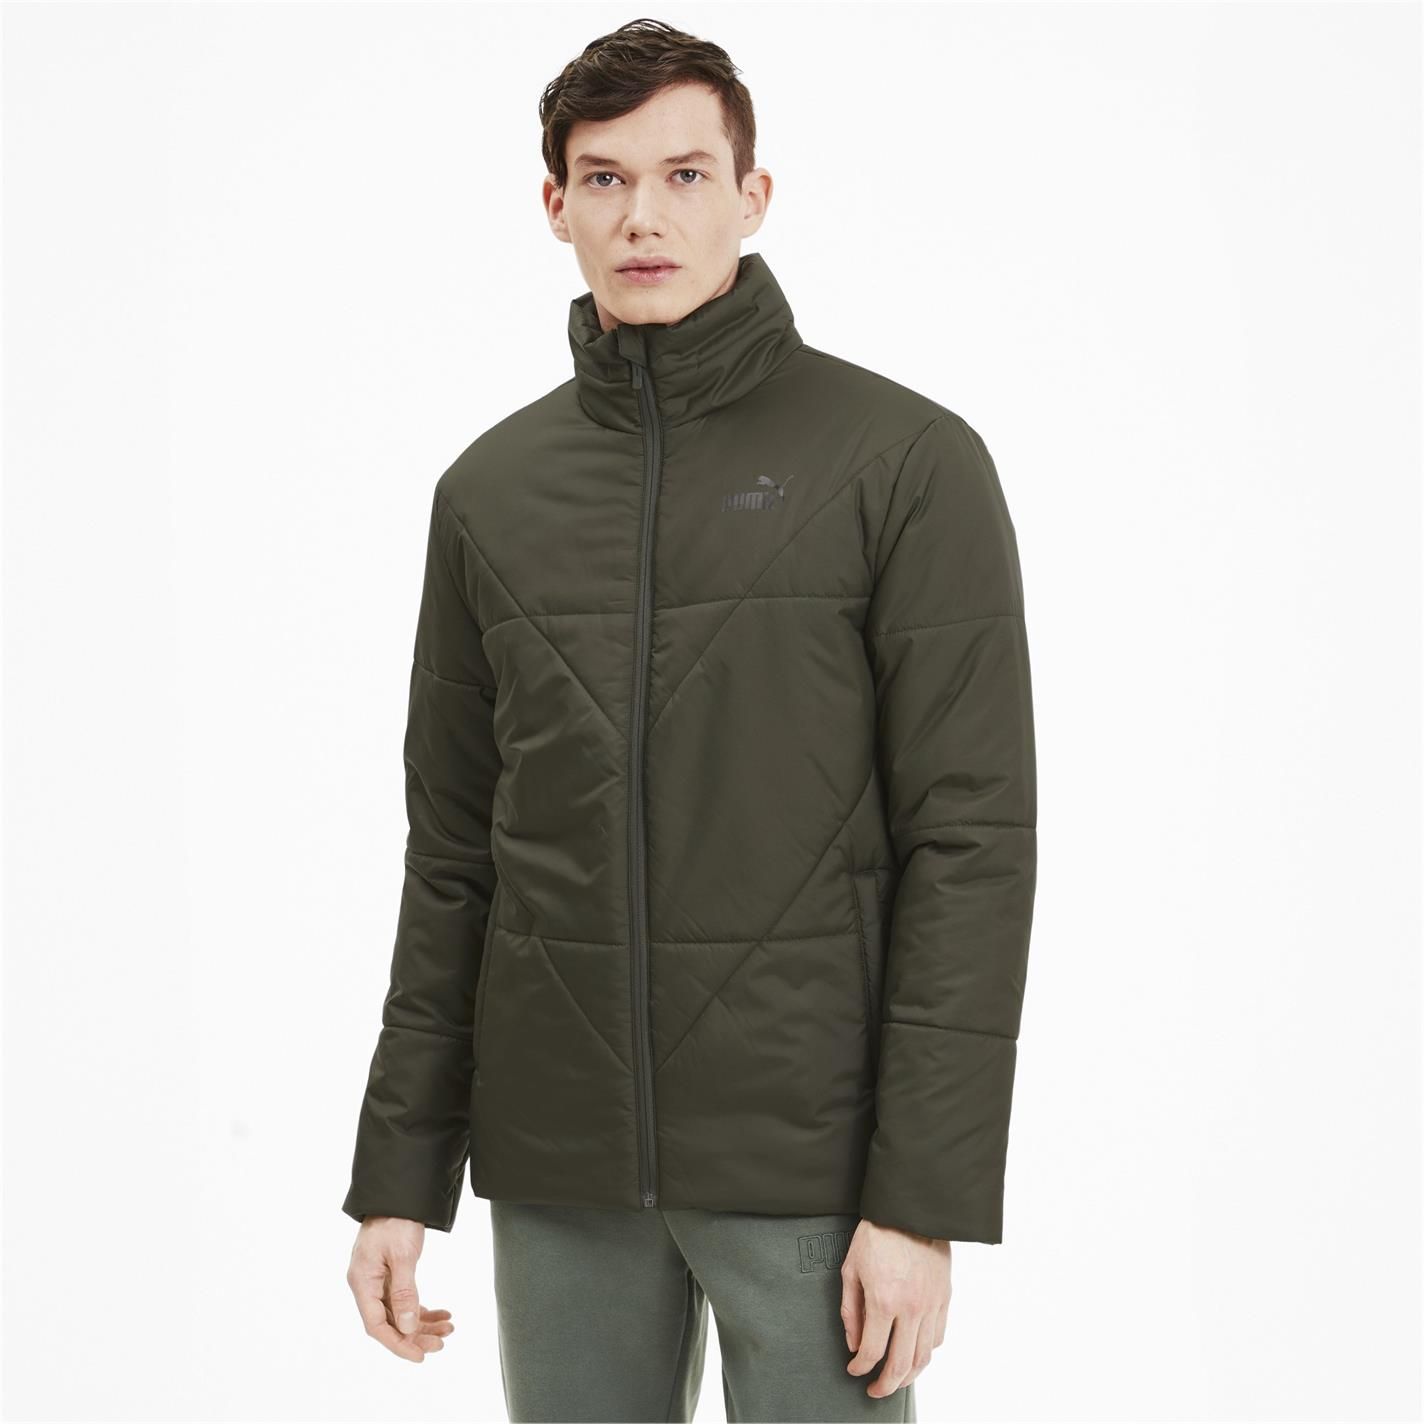 Puma Essential Padded Jacket Mens - This great Puma Essential Padded Jacket has been made to for a standard fit with a full zip fastening closure, side pockets, interior welt pocket and a classic chest logo.